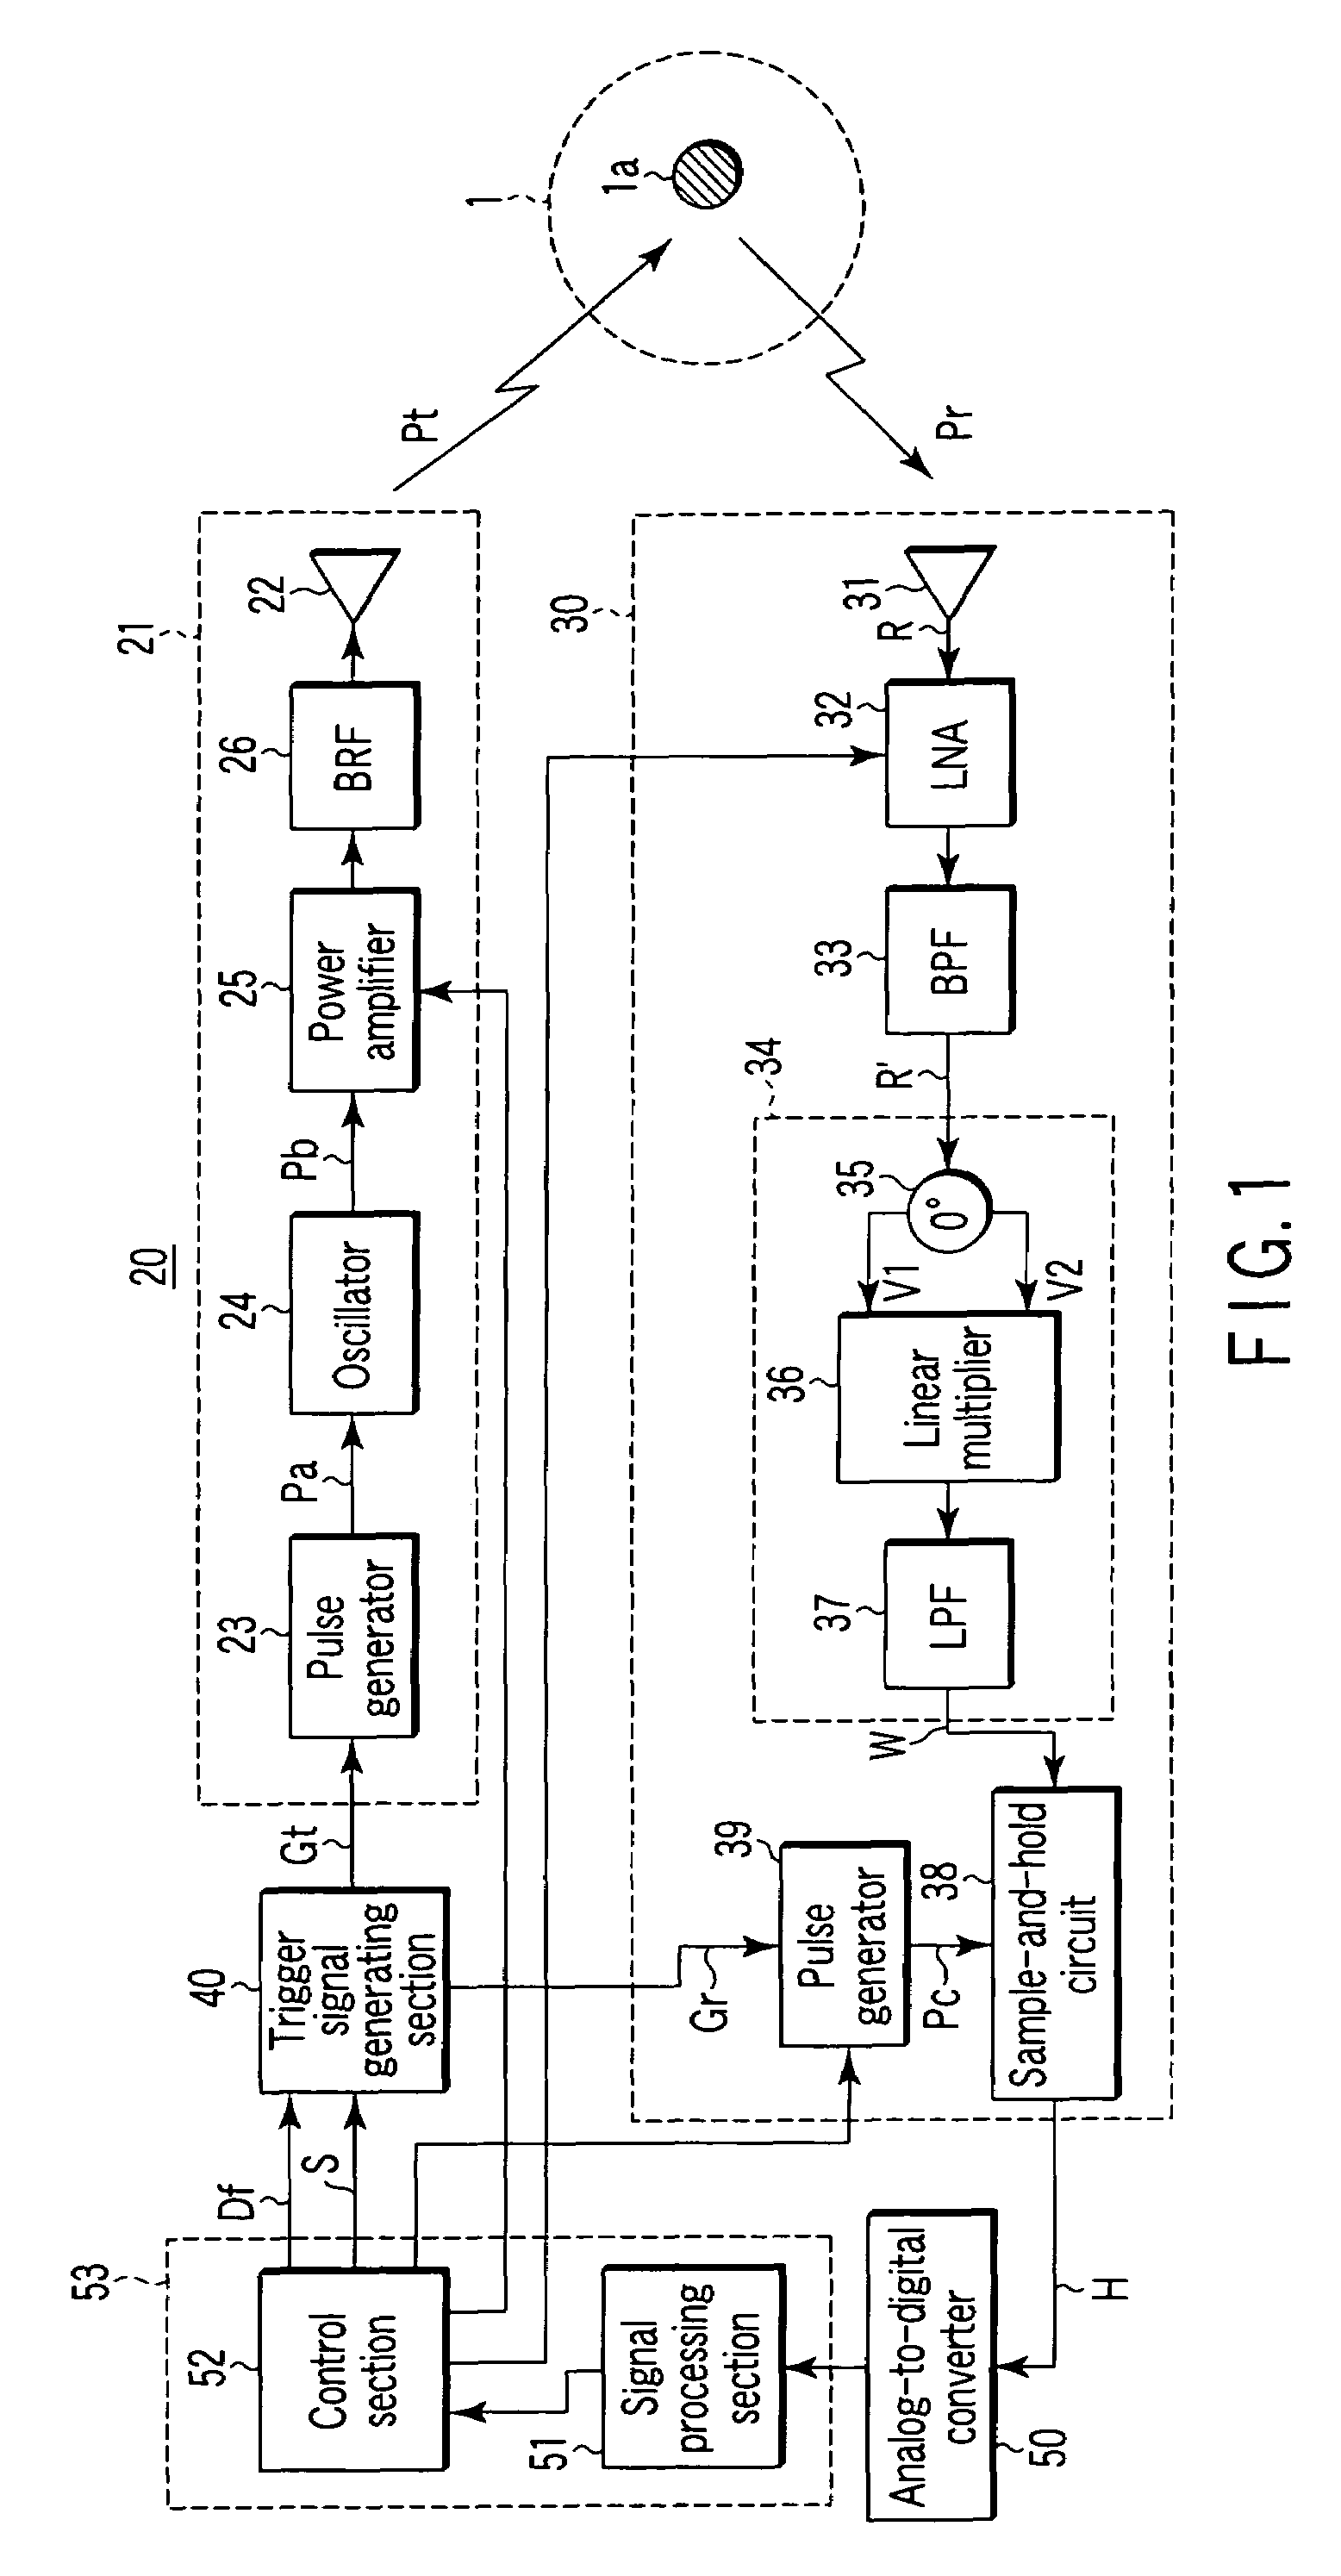 Small-sized low-power dissipation short-range radar that can arbitrarily change delay time between transmission and reception with high time resolution and method of controlling the same